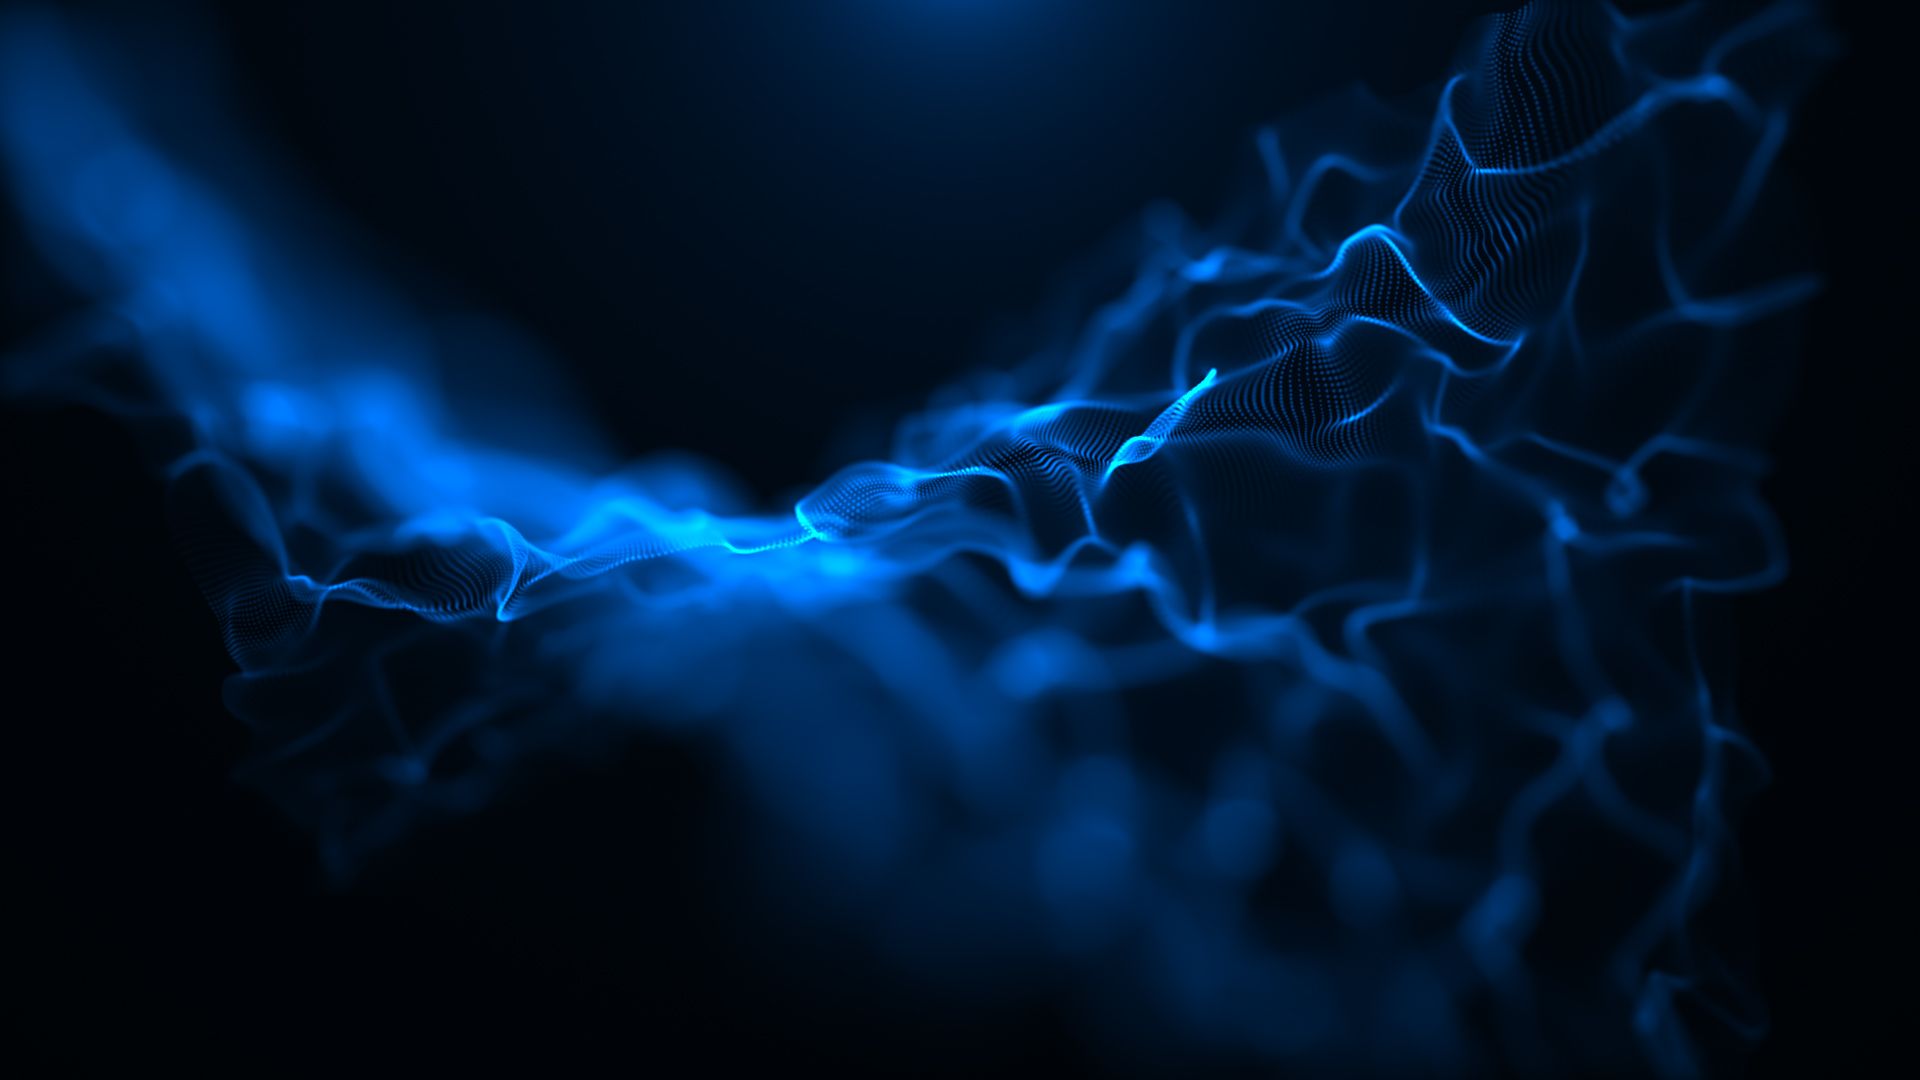 Abstract Blue Form Desktop Wallpaper Nr By Emil1213